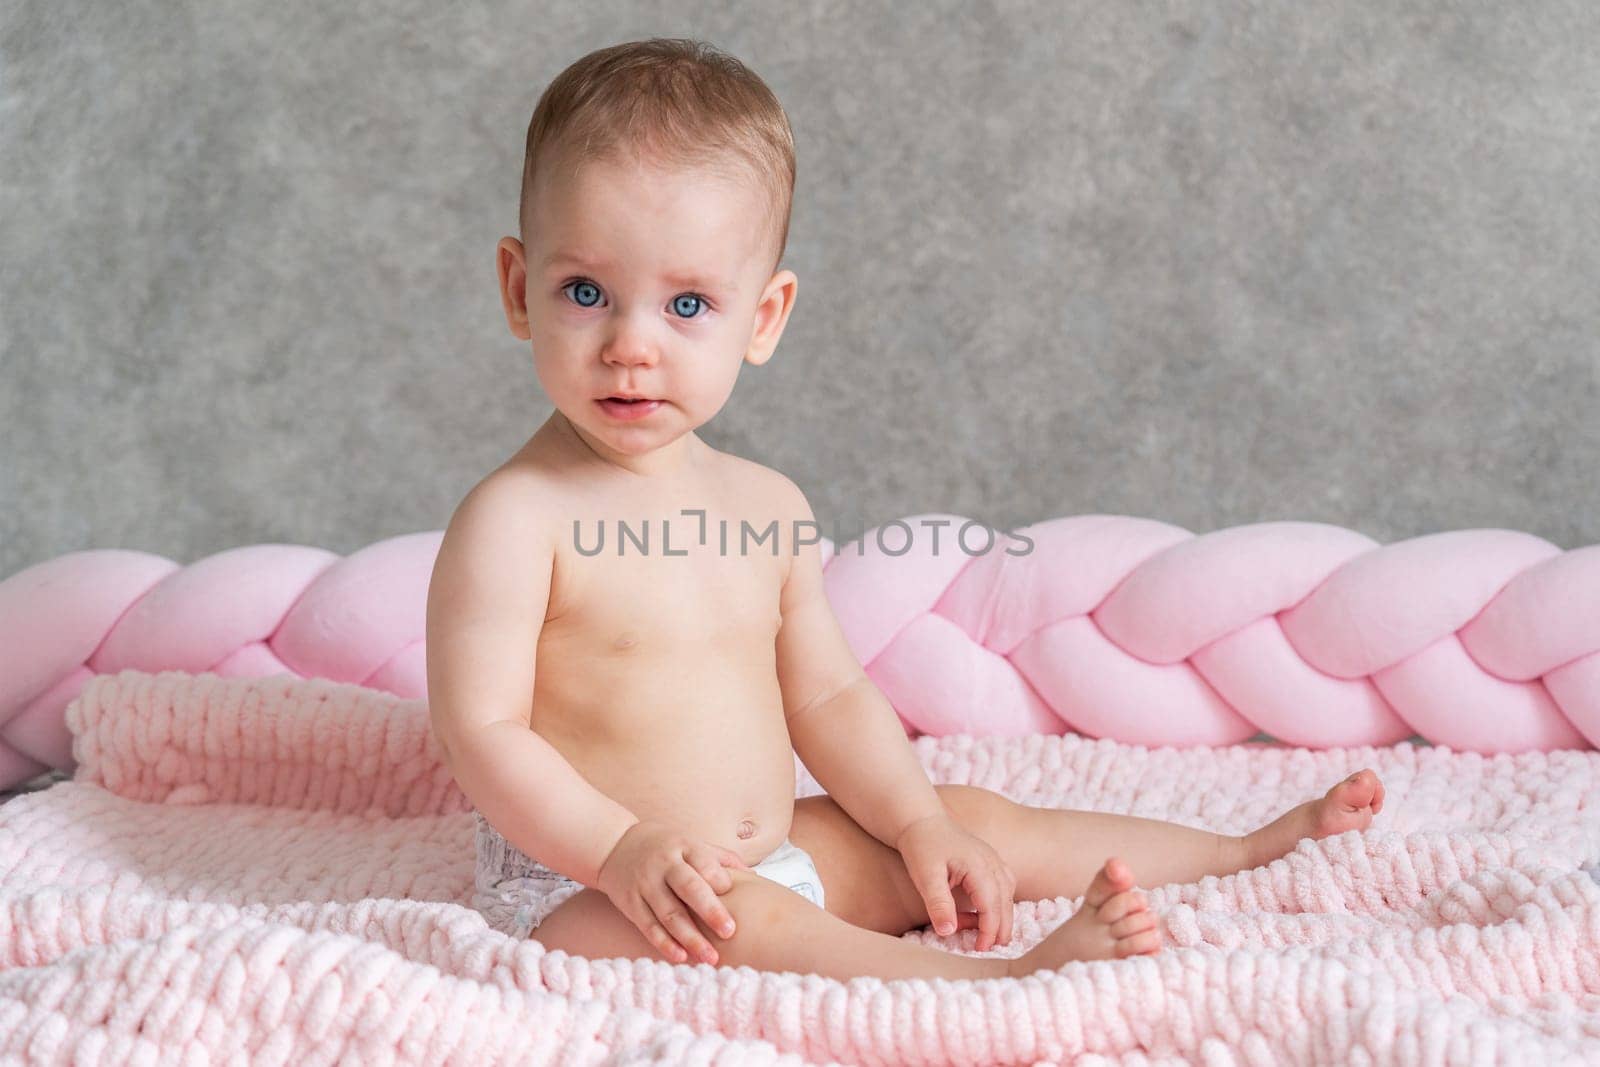 A direct look into the camera of a baby sitting on the bed. Universal concept.